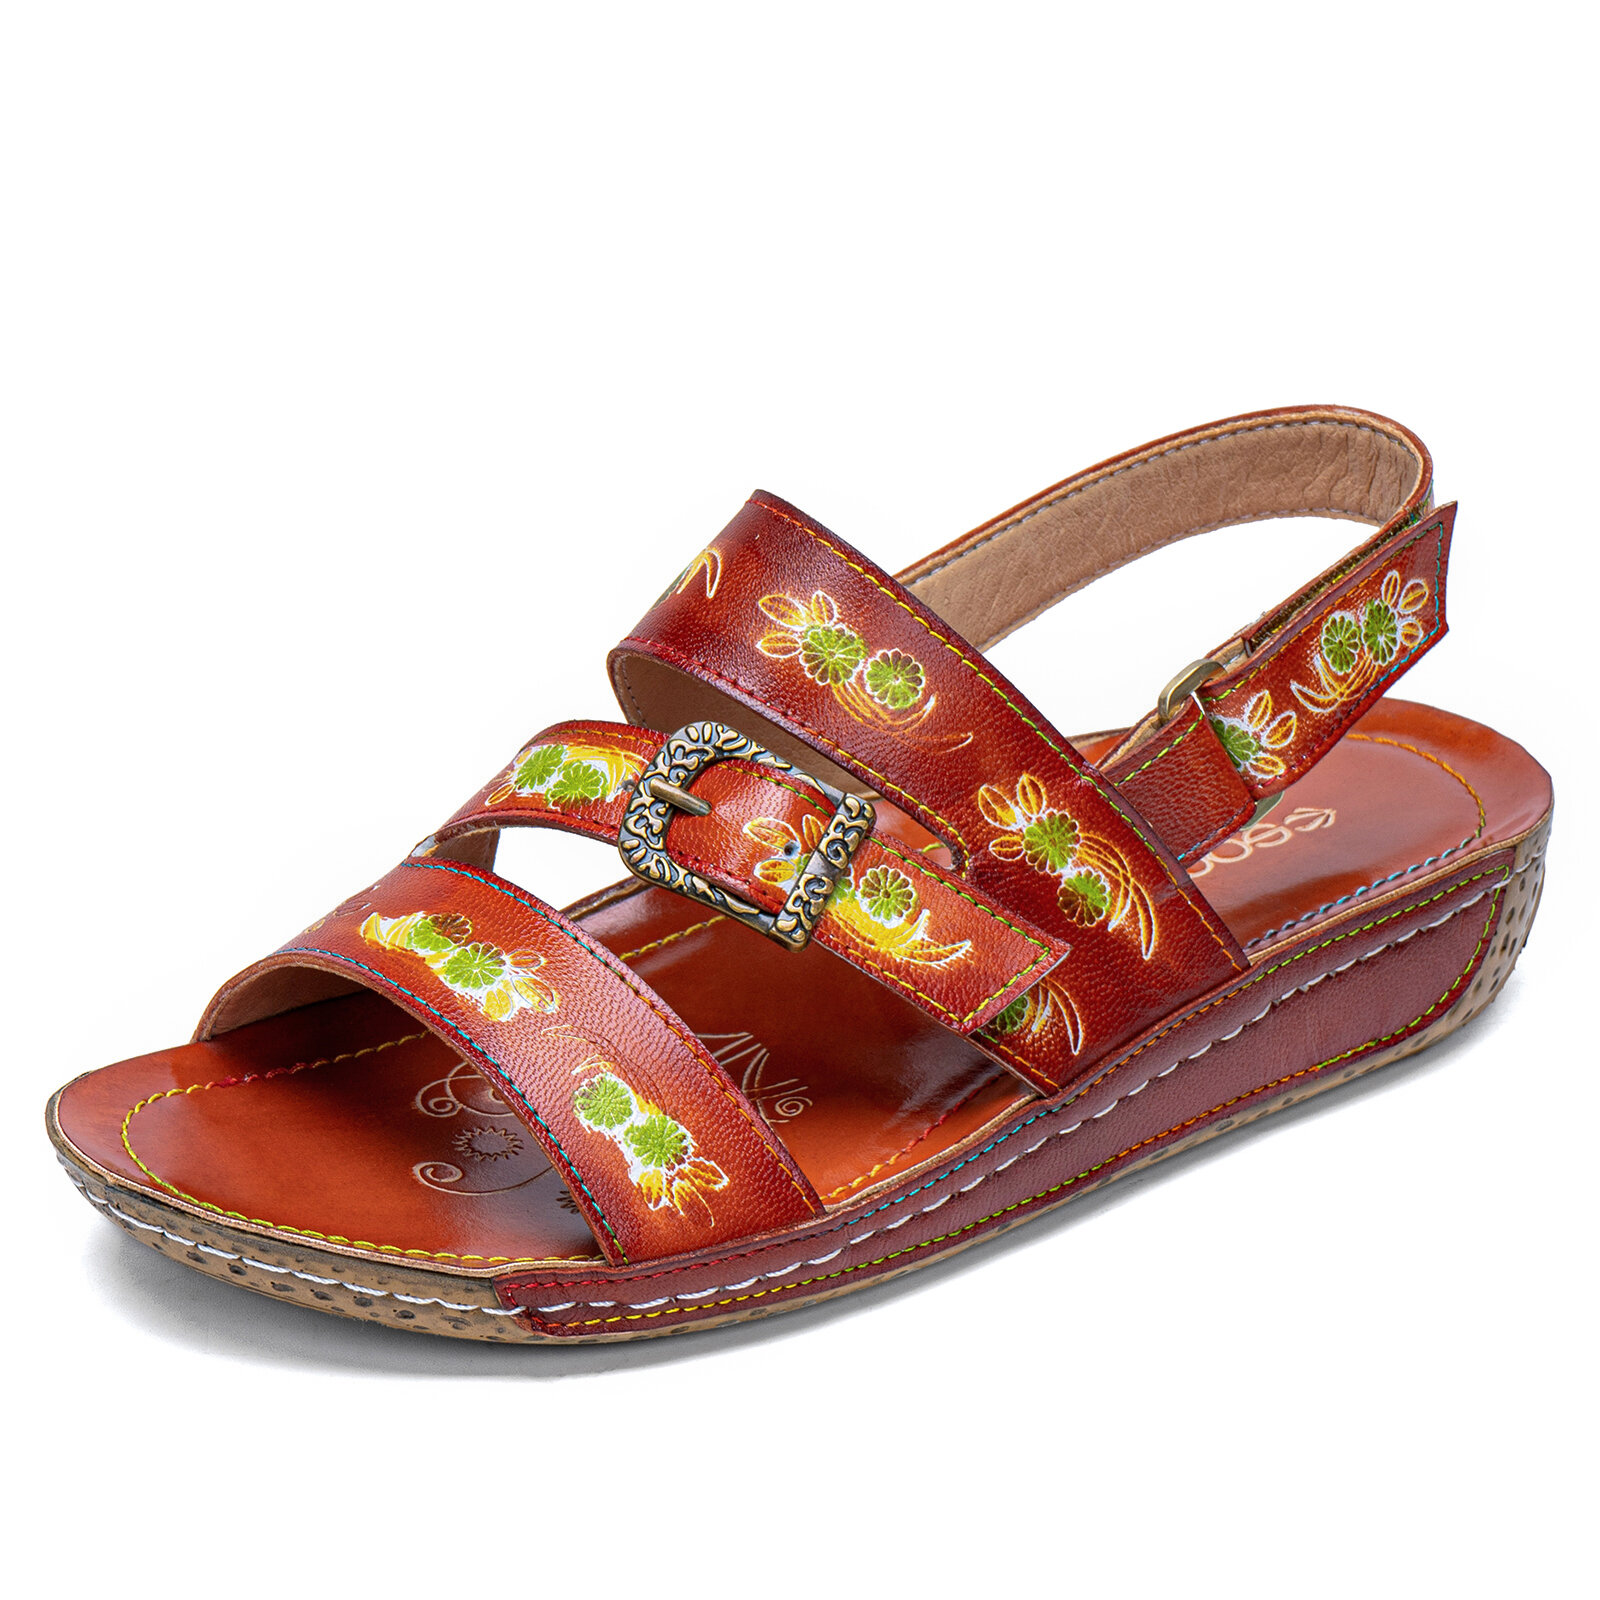 

Socofy Comfy Leather Flowers Printed Retro Stripe Flat Sandals